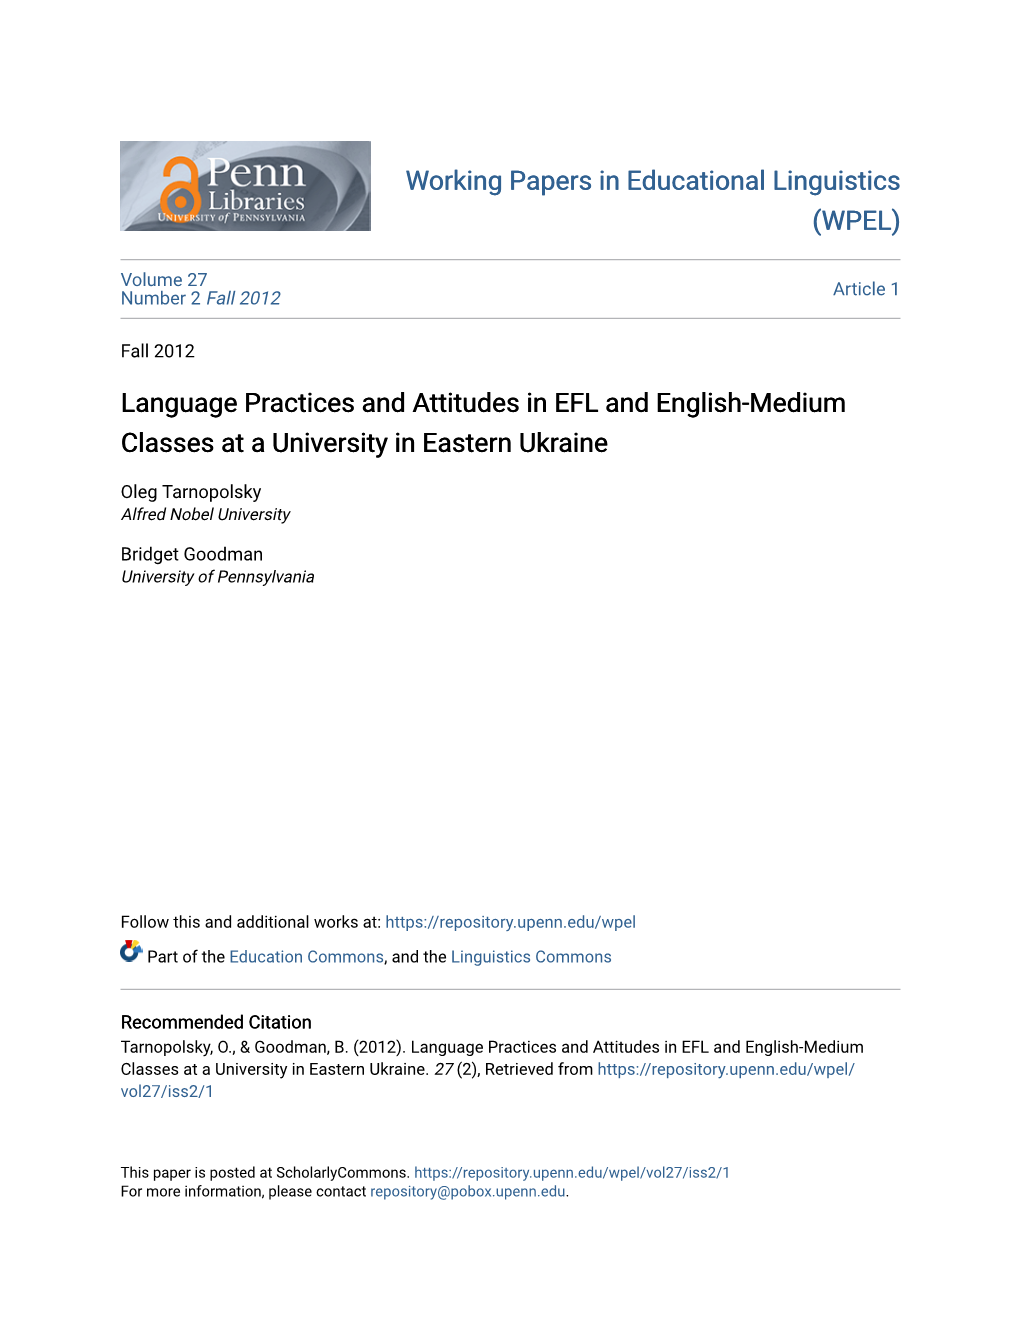 Language Practices and Attitudes in EFL and English-Medium Classes at a University in Eastern Ukraine